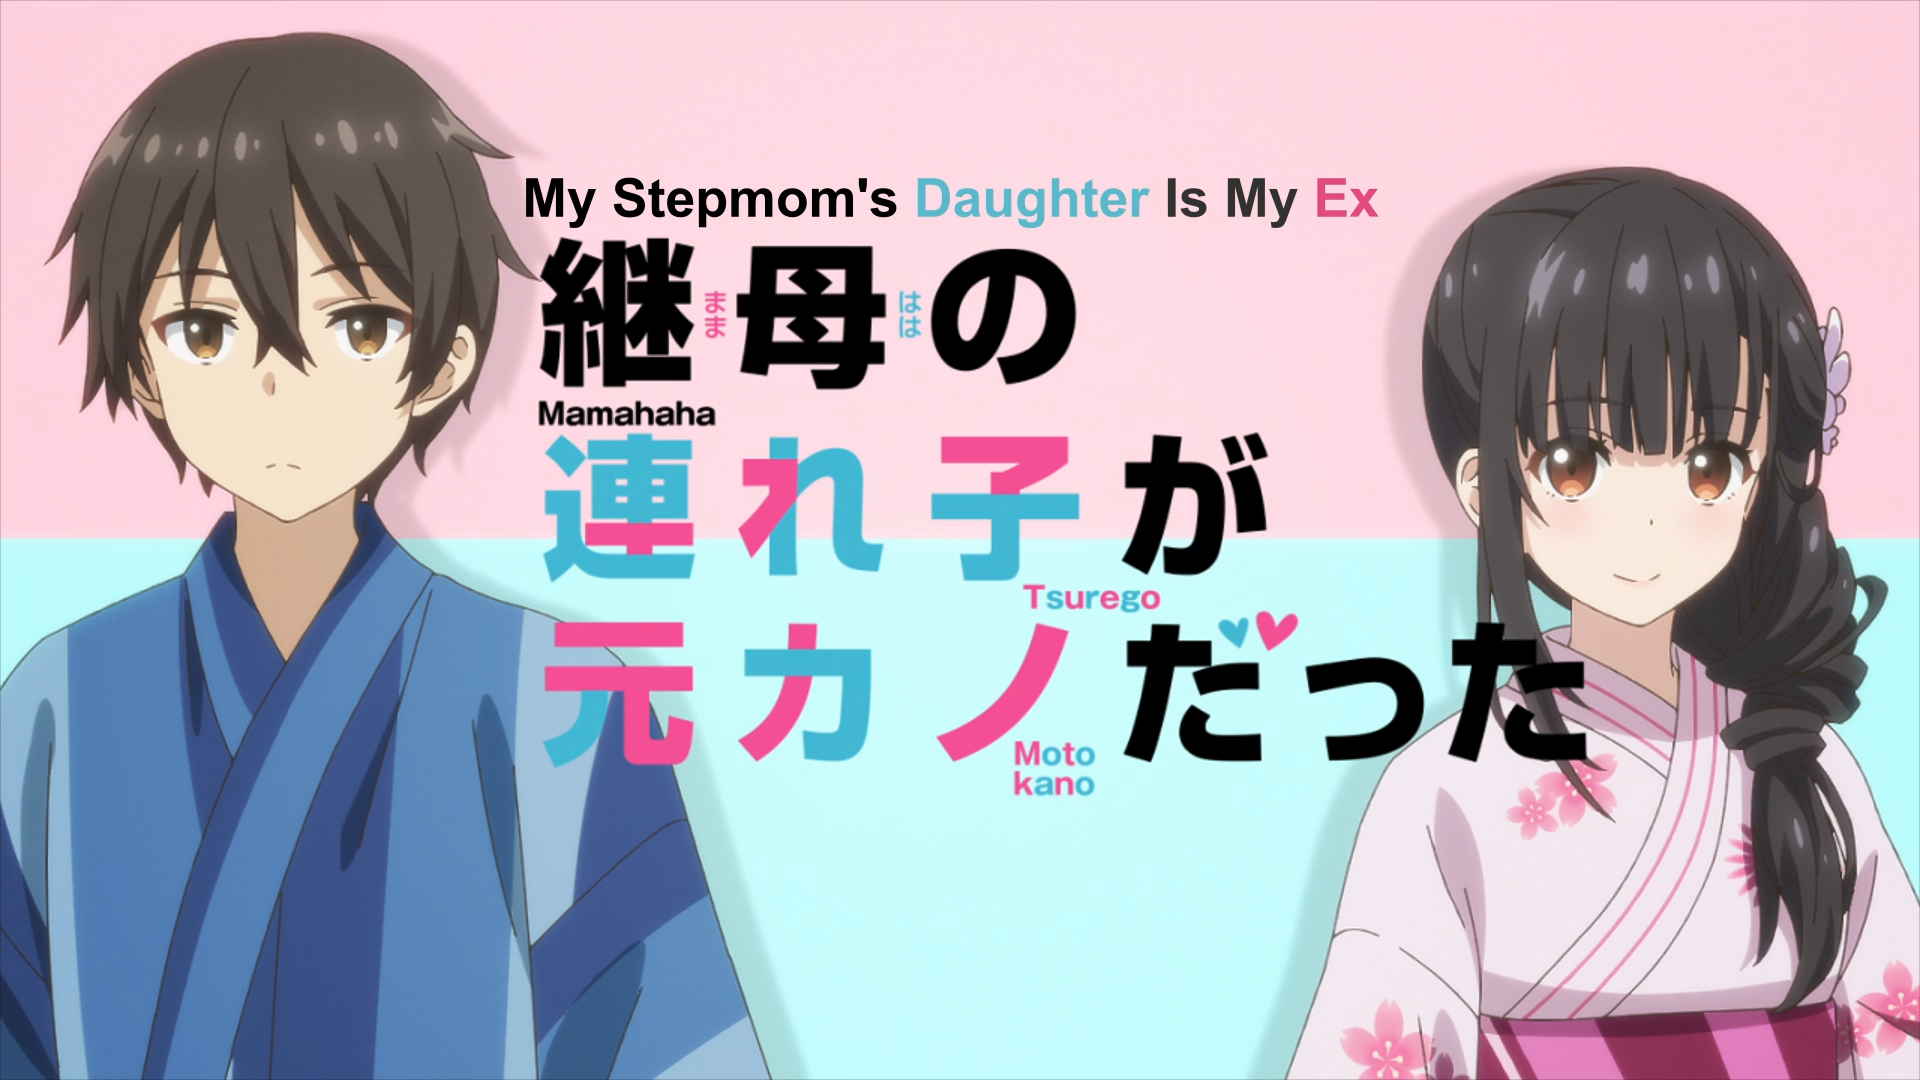 My Stepmom's Daughter Is My Ex Official Trailer 2/Mamahaha no